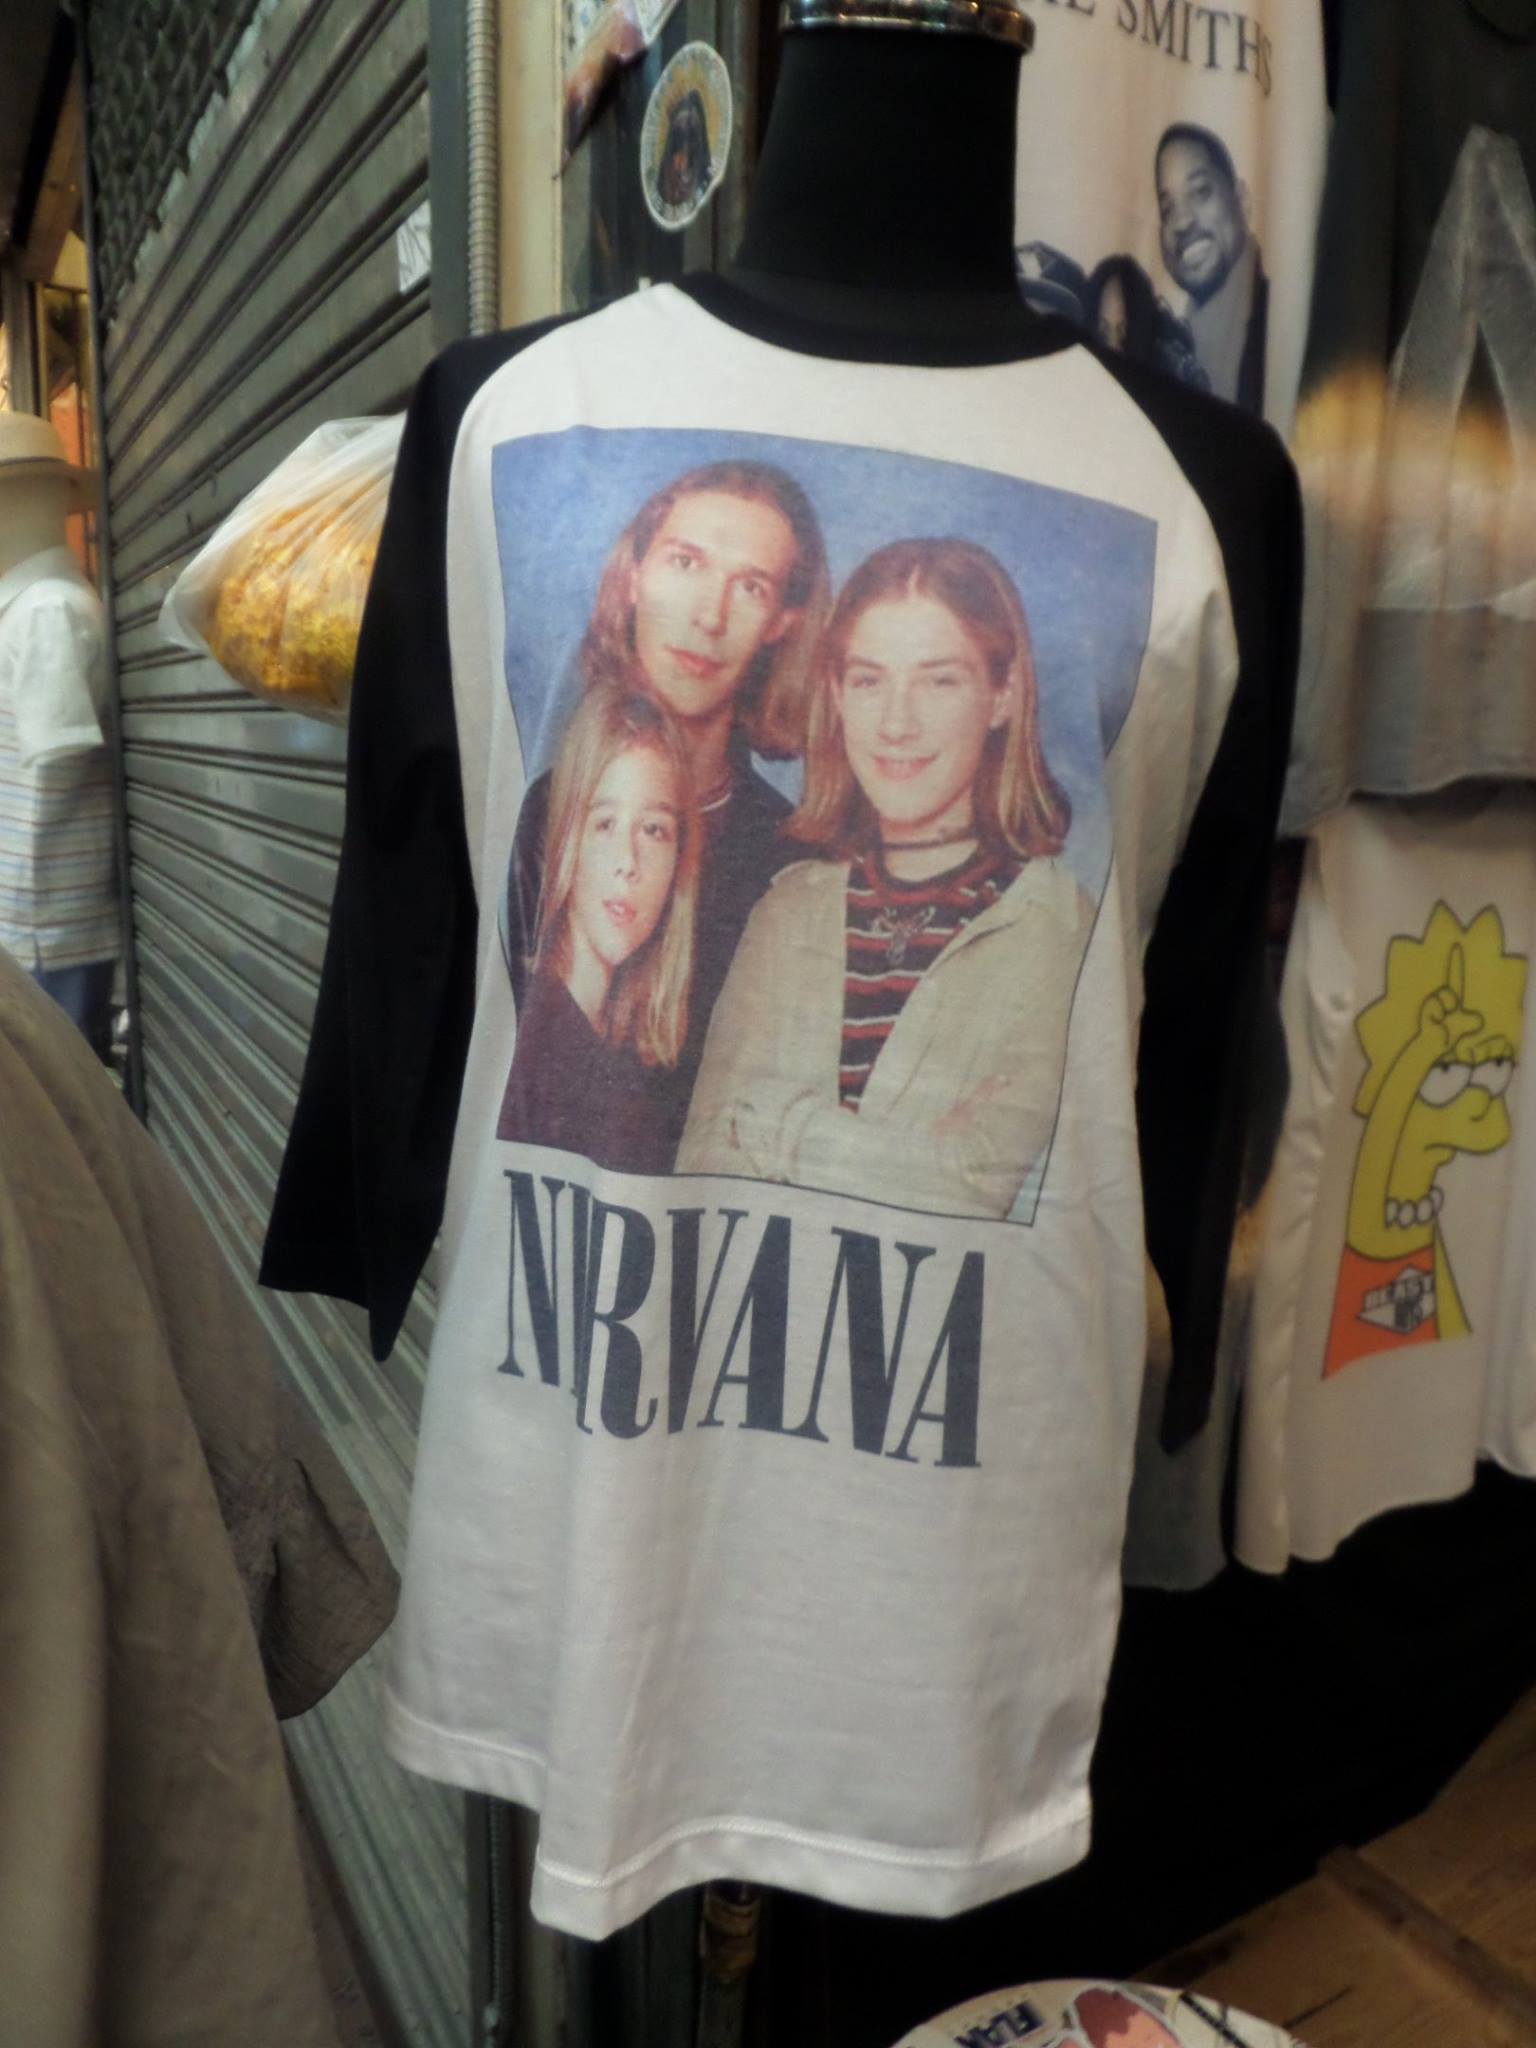 Shirt for sale in Bangkok, Thailand is the biggest insult to the band Nirvana of all time.